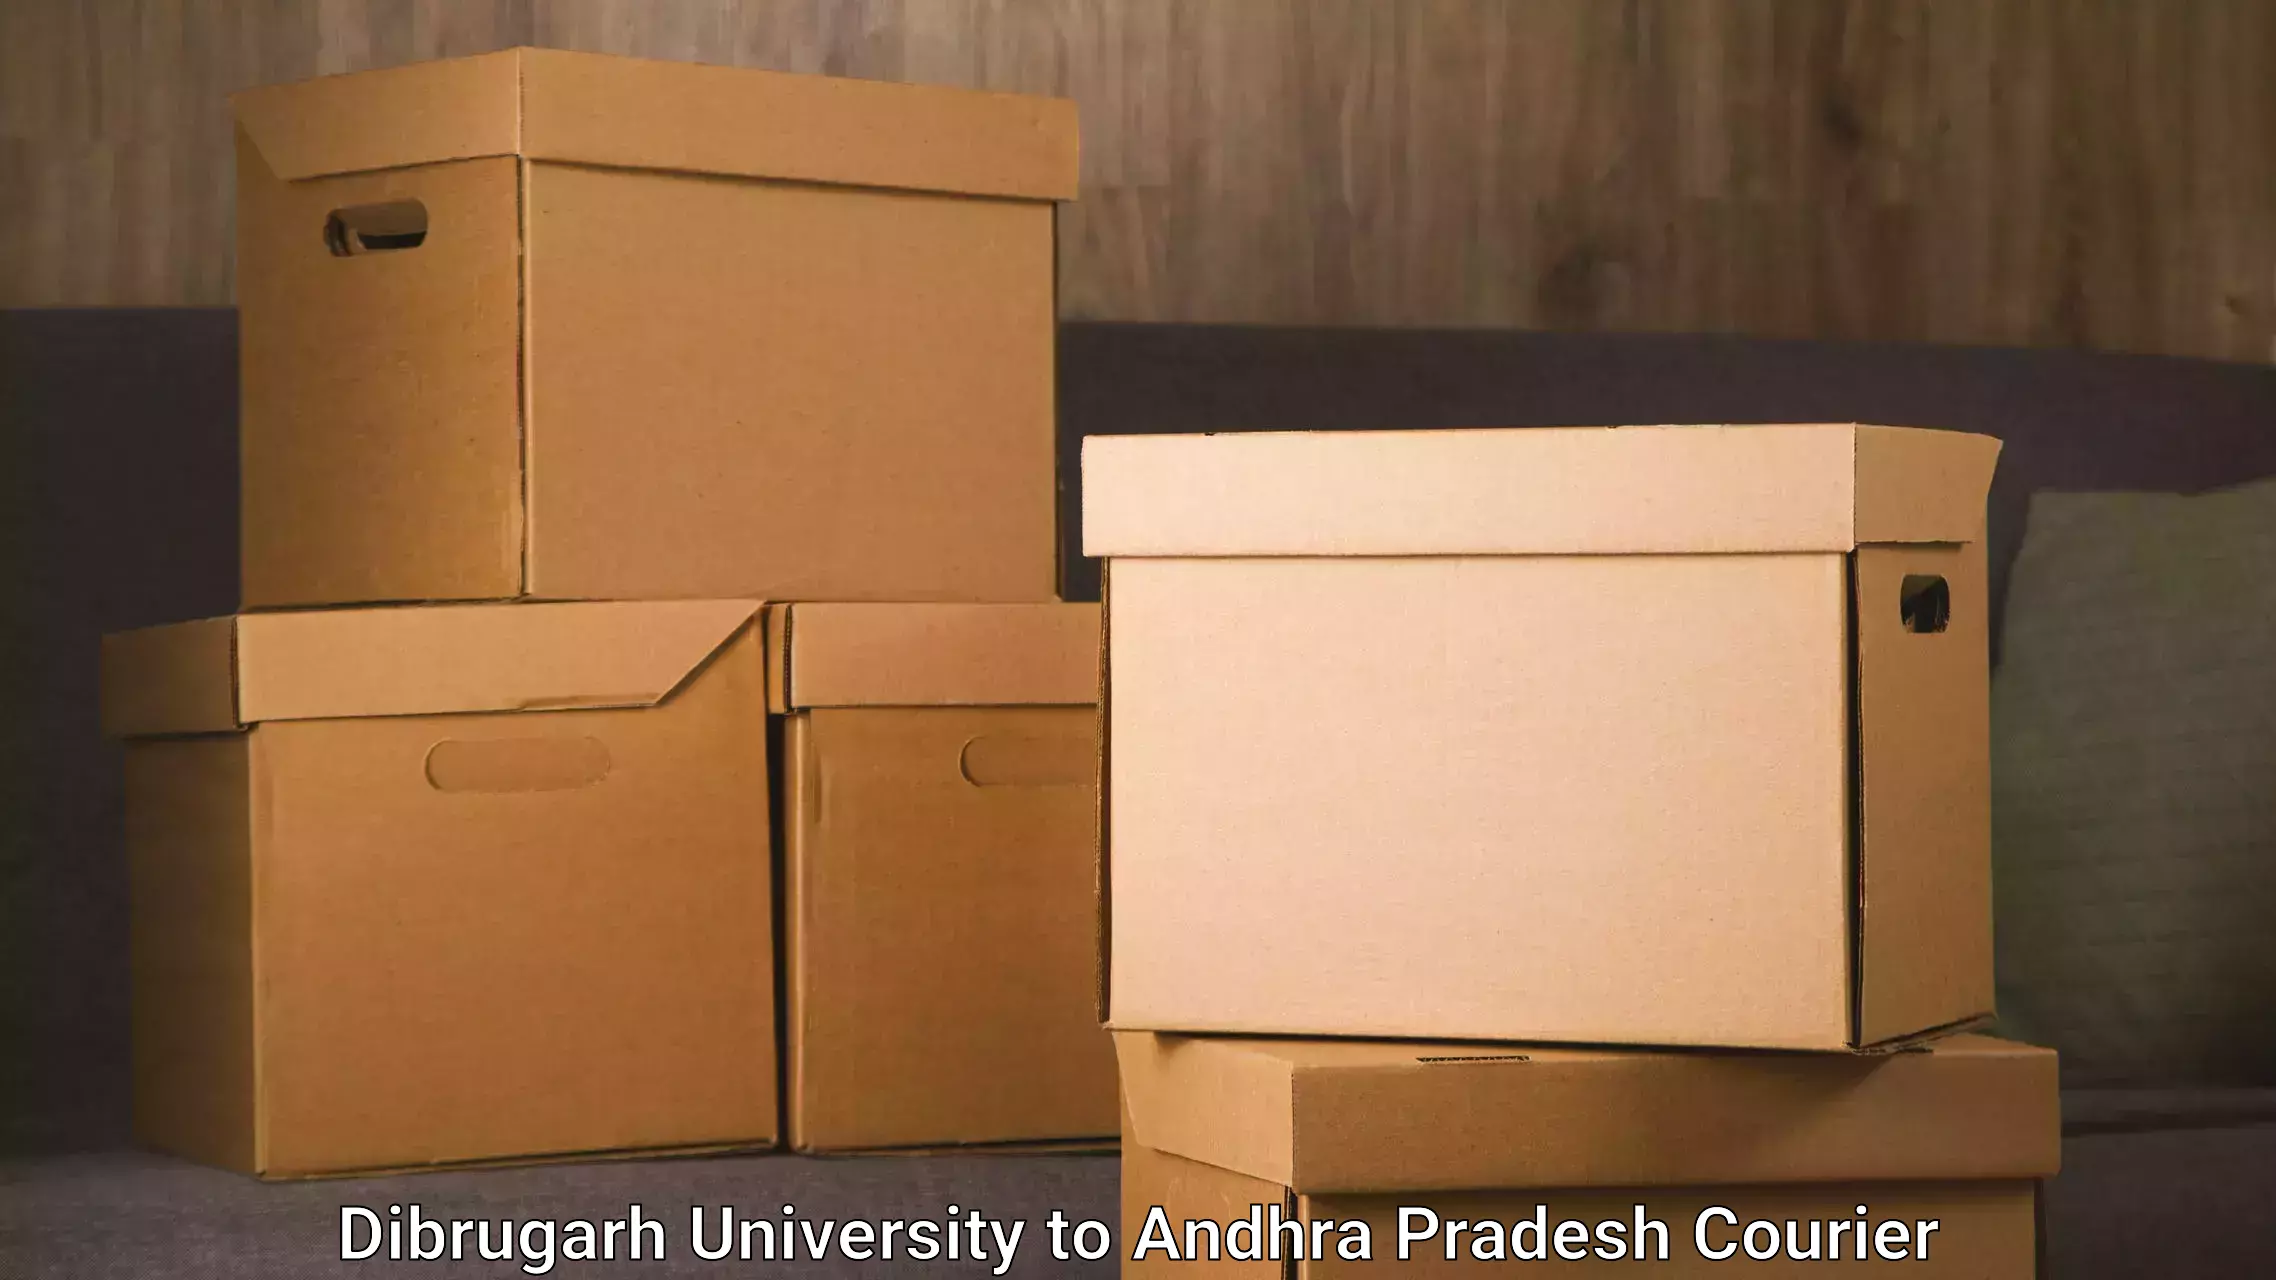 Express delivery solutions in Dibrugarh University to Rayachoti